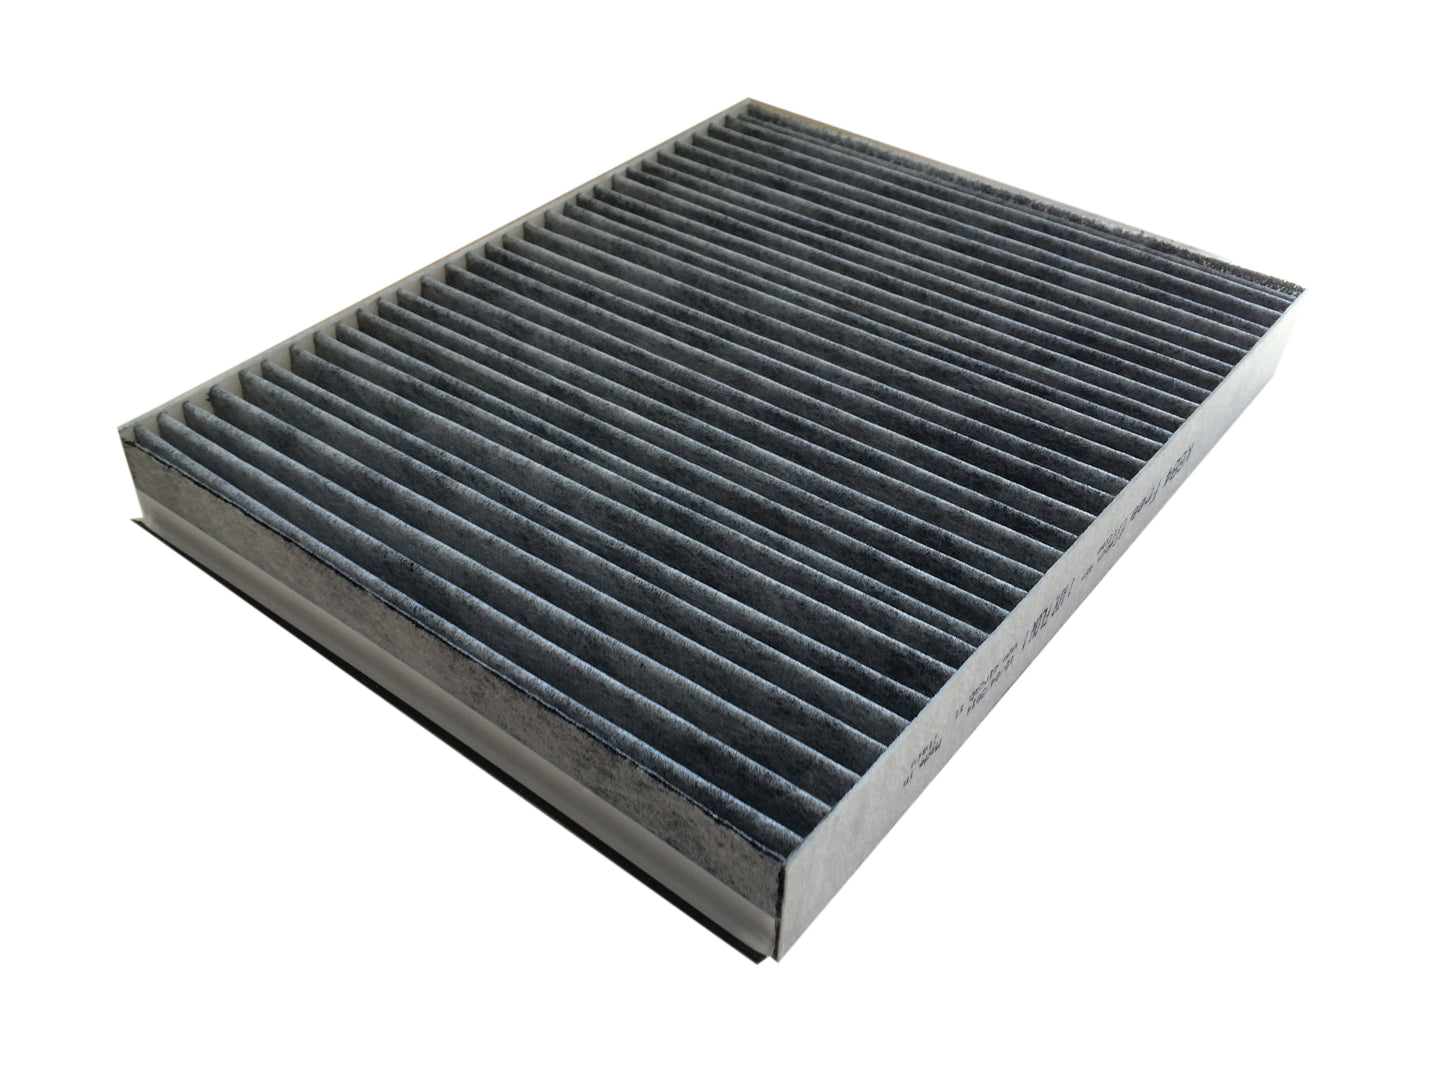 BMW CABIN AIR FILTERS Alliance Auto Products